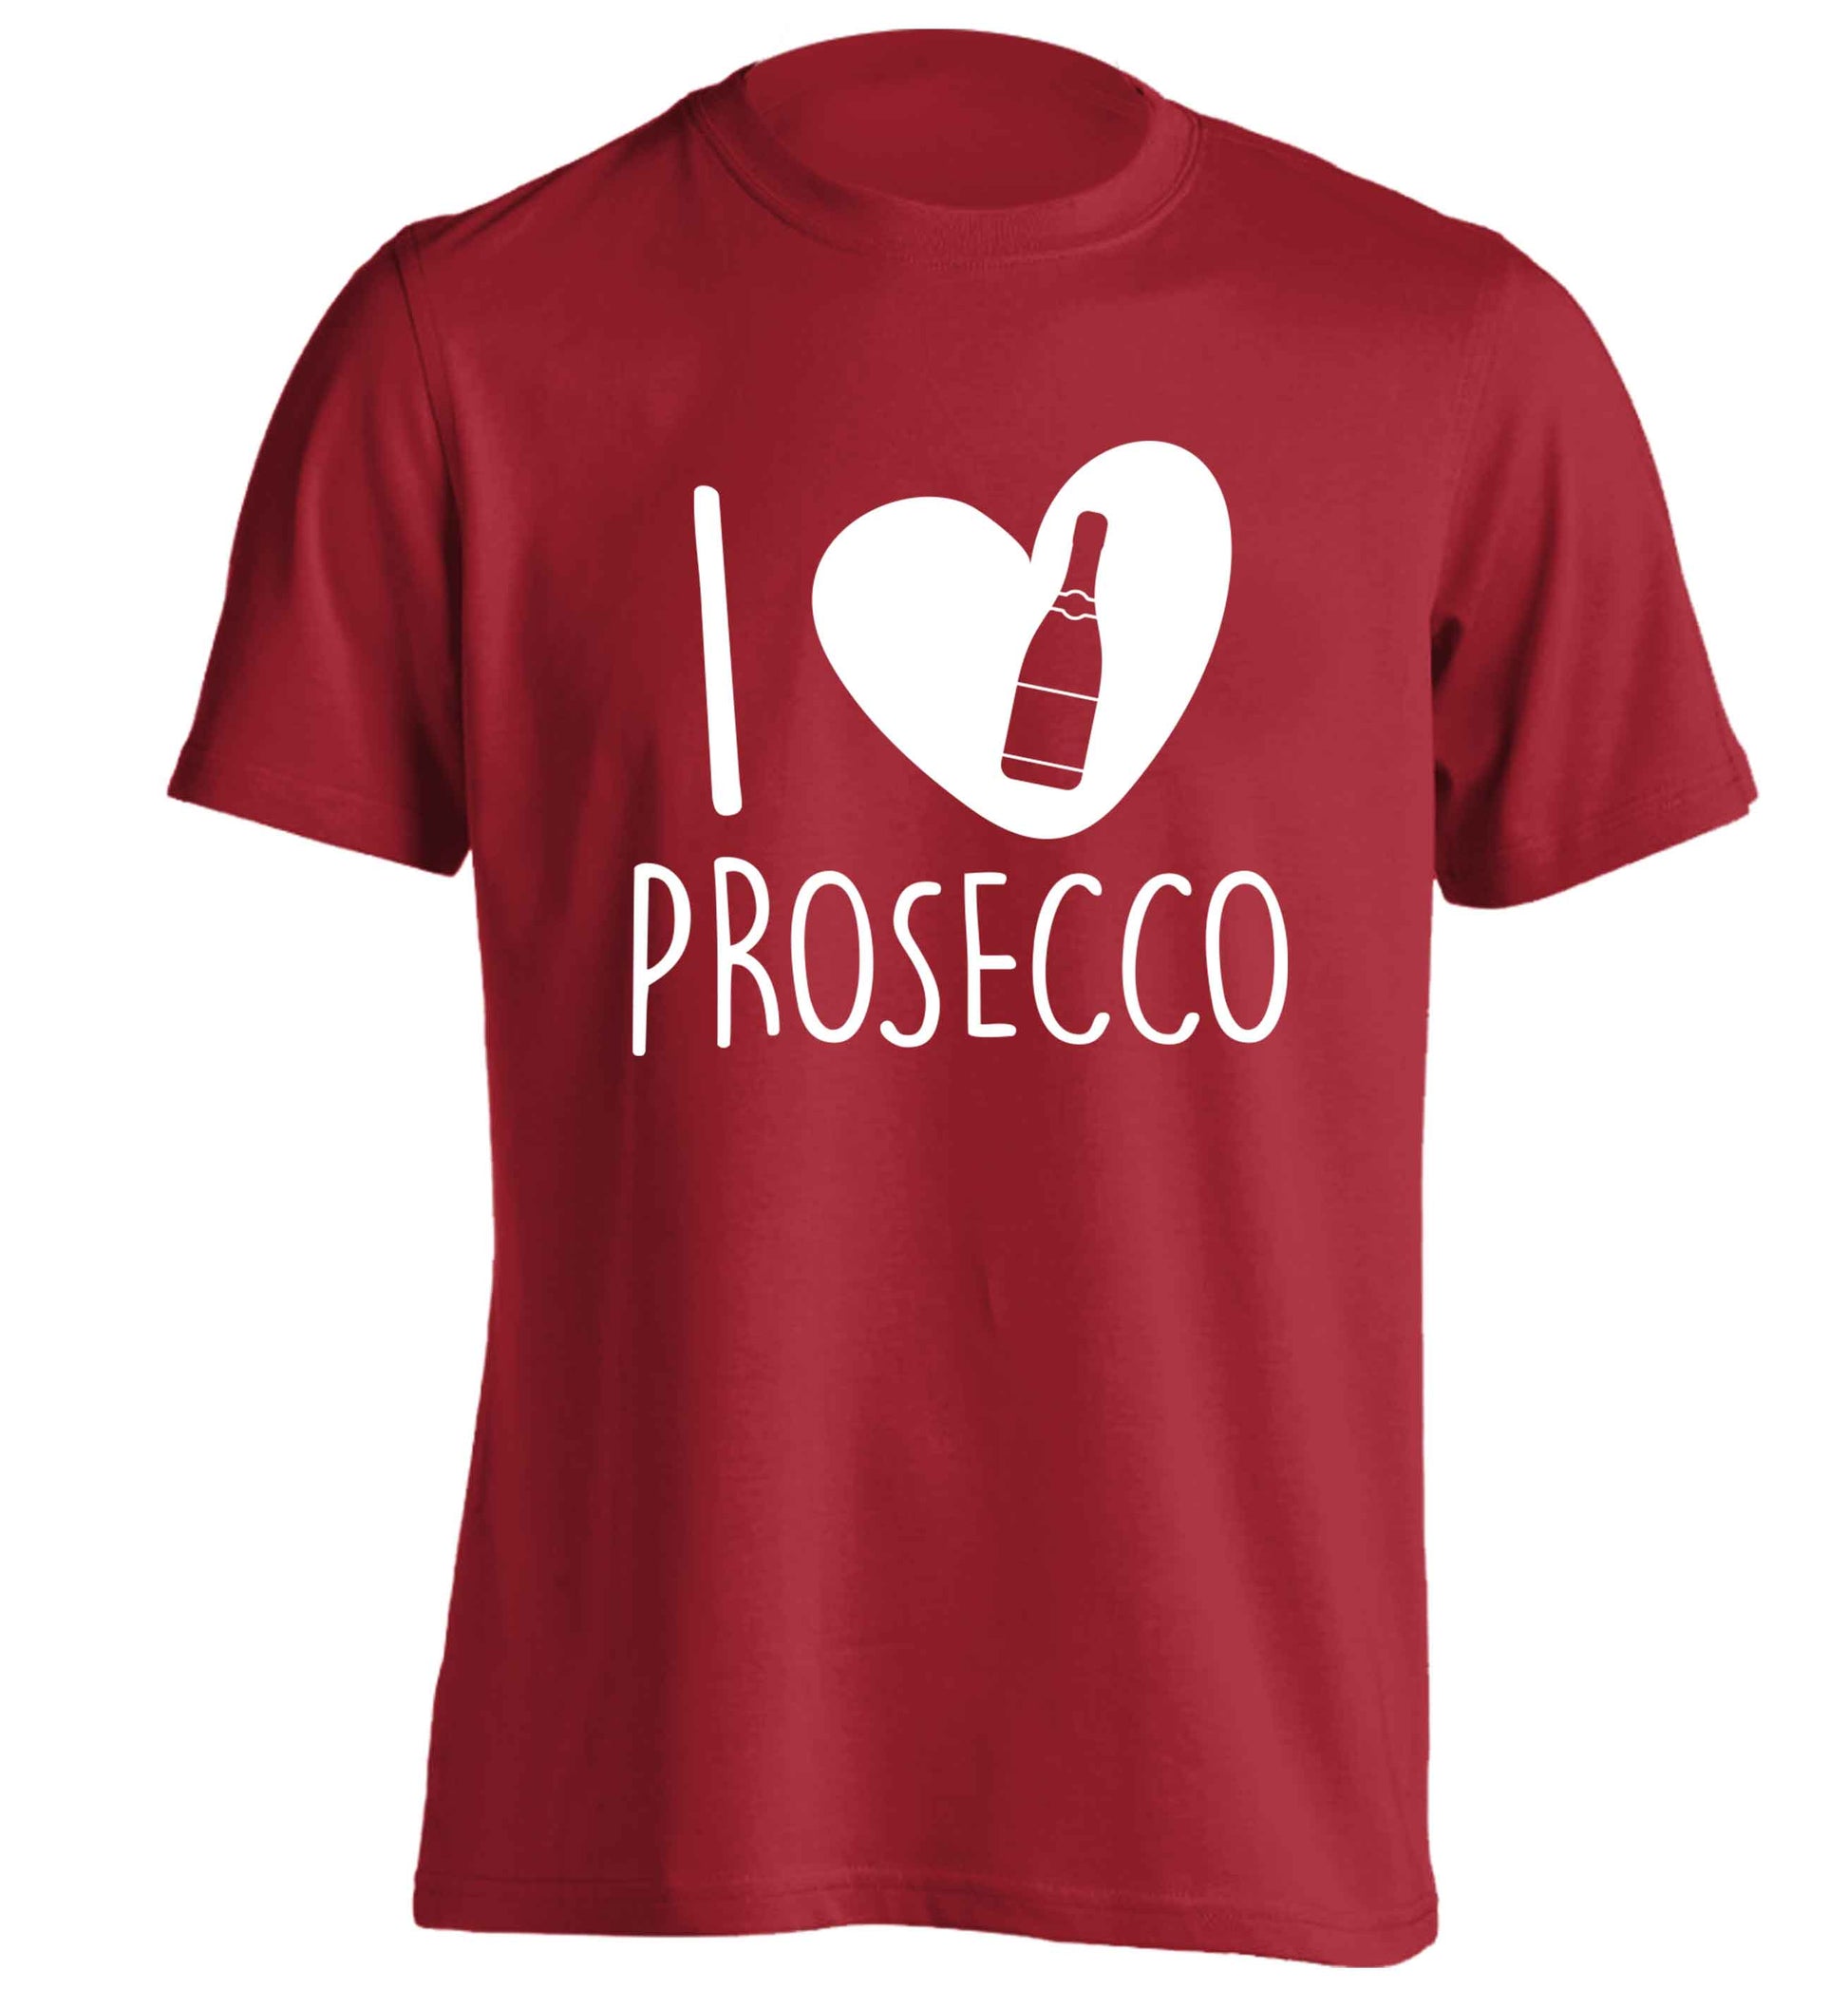 I love prosecco adults unisex red Tshirt 2XL